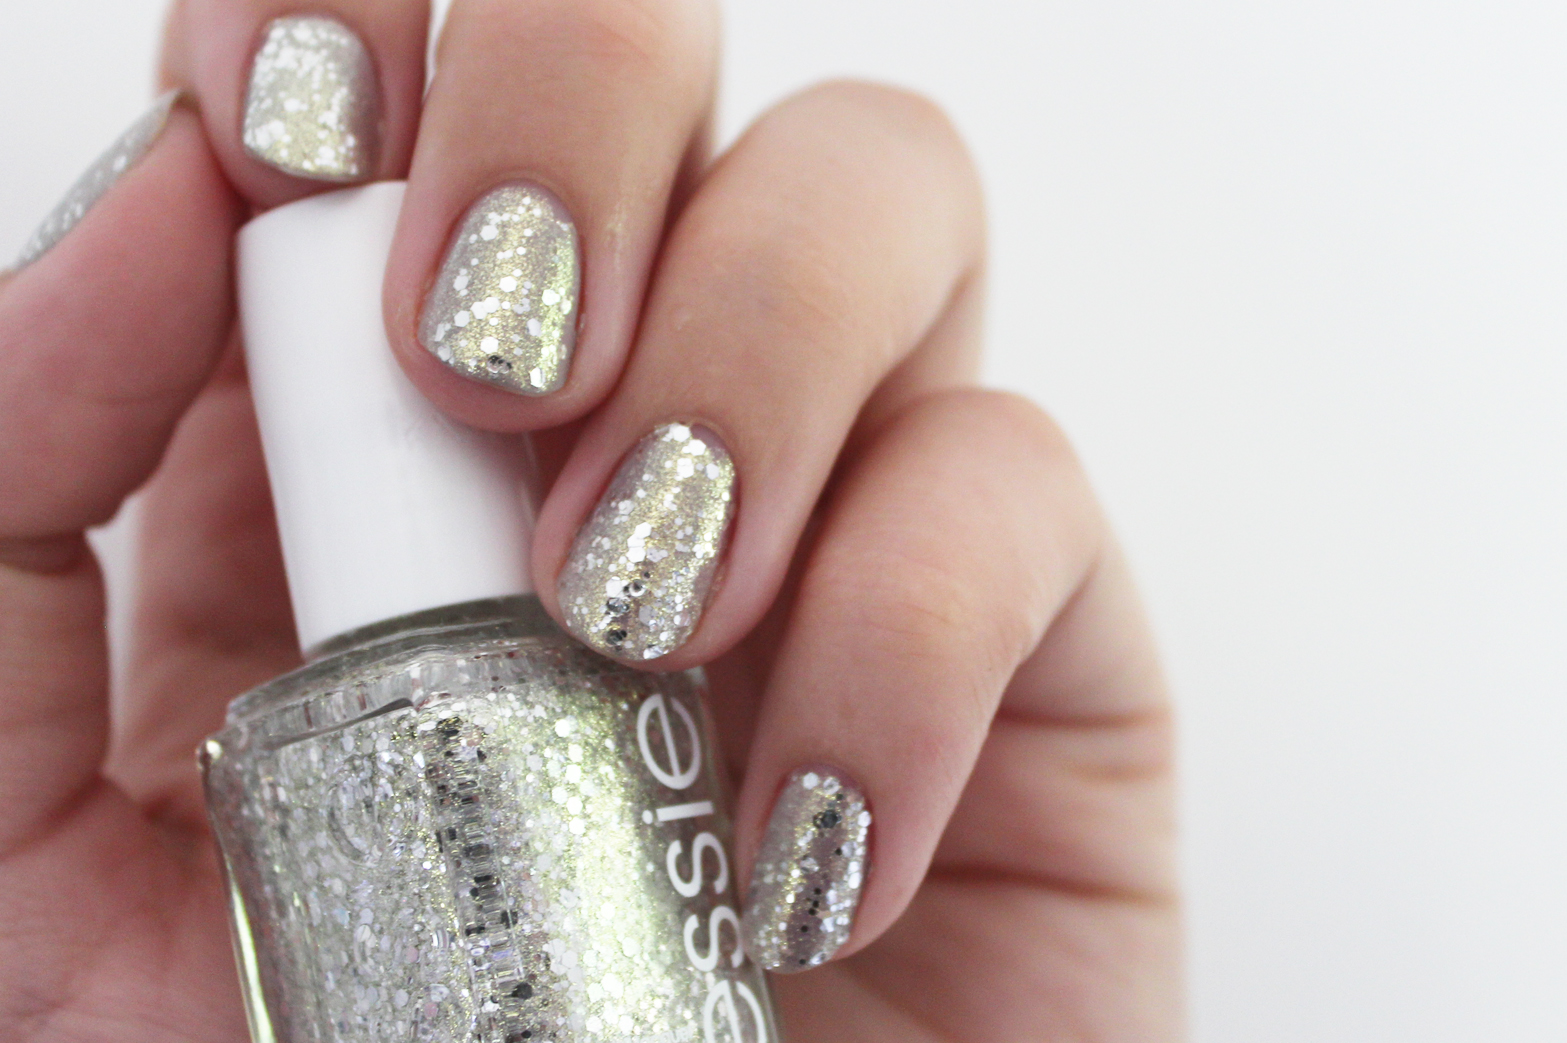 NOTD | Essie Take It Outside + Hors d'Oeuvres - CassandraMyee